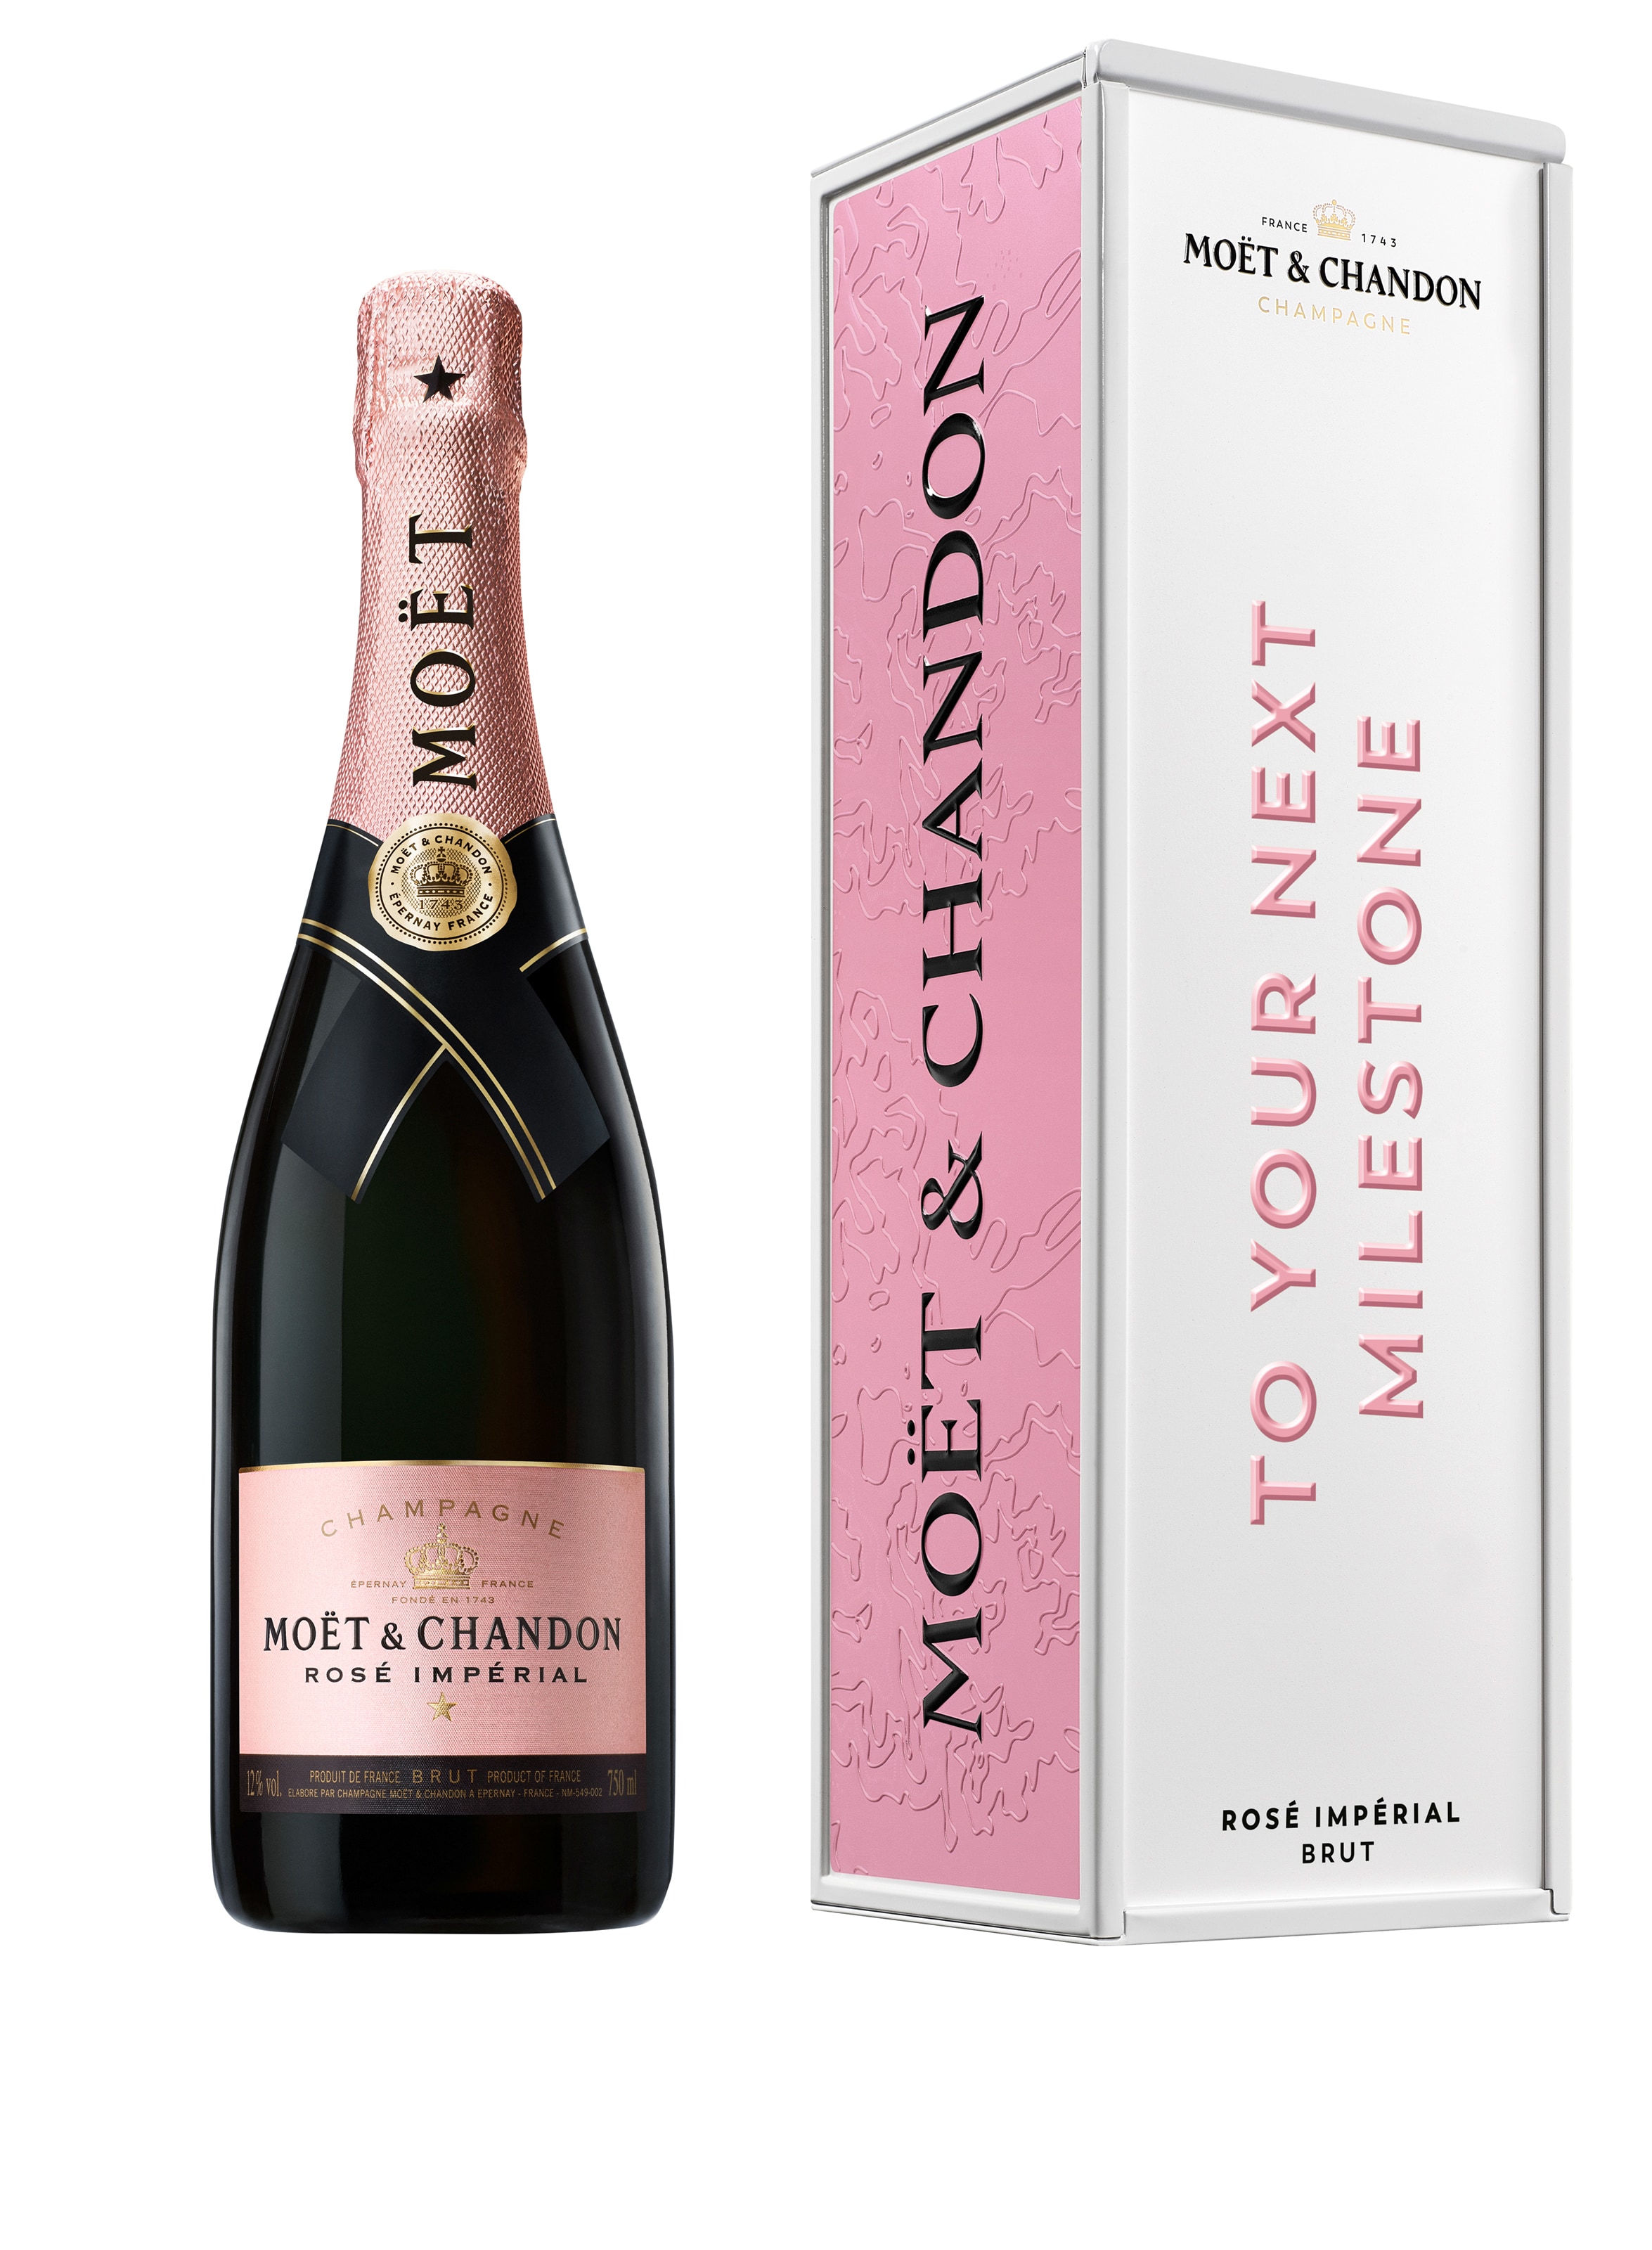 Moët & Chandon Champagne 6-Packs Are Here, and They're Precious